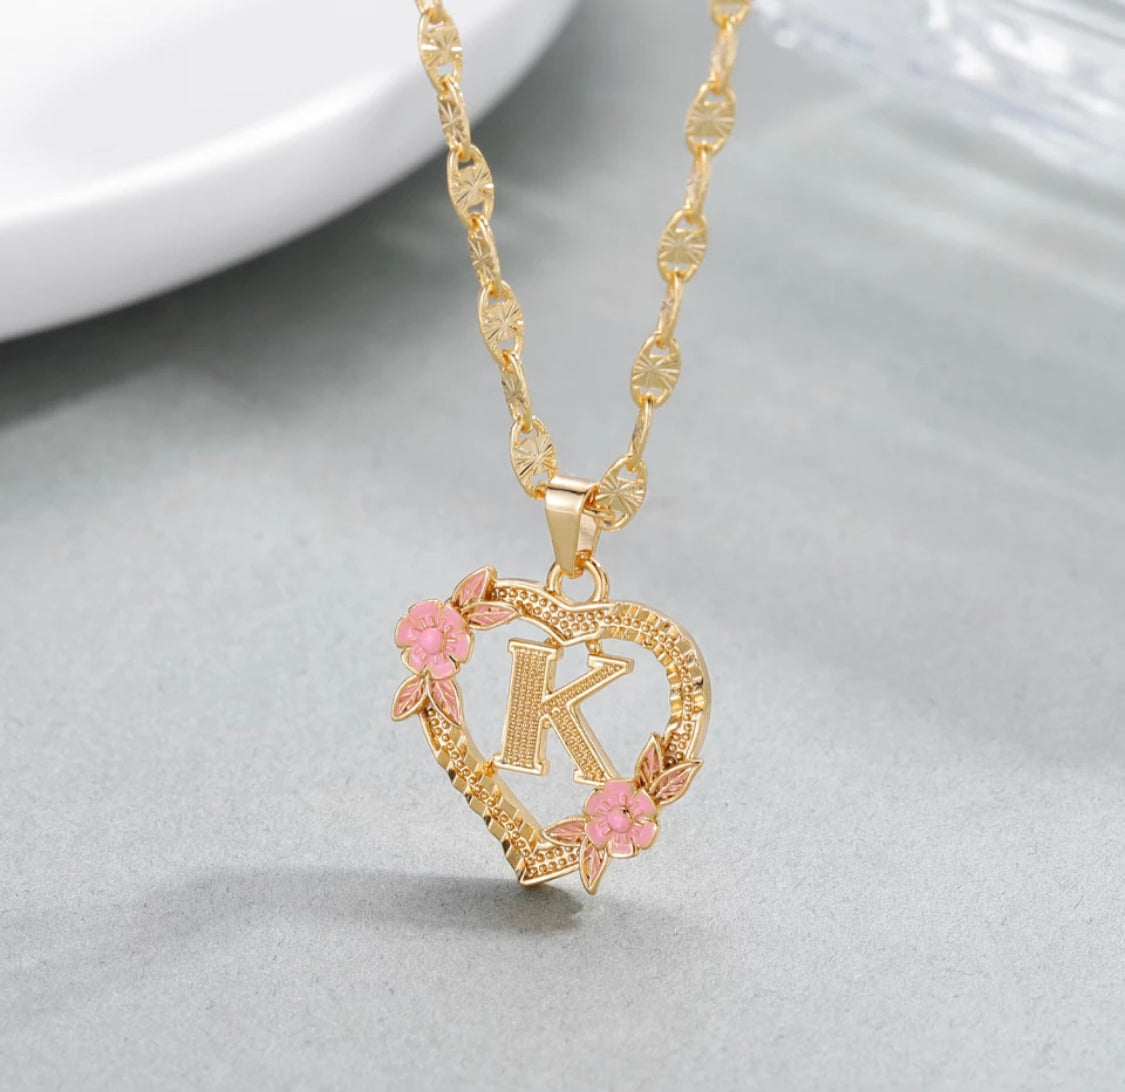 The flower initial necklace